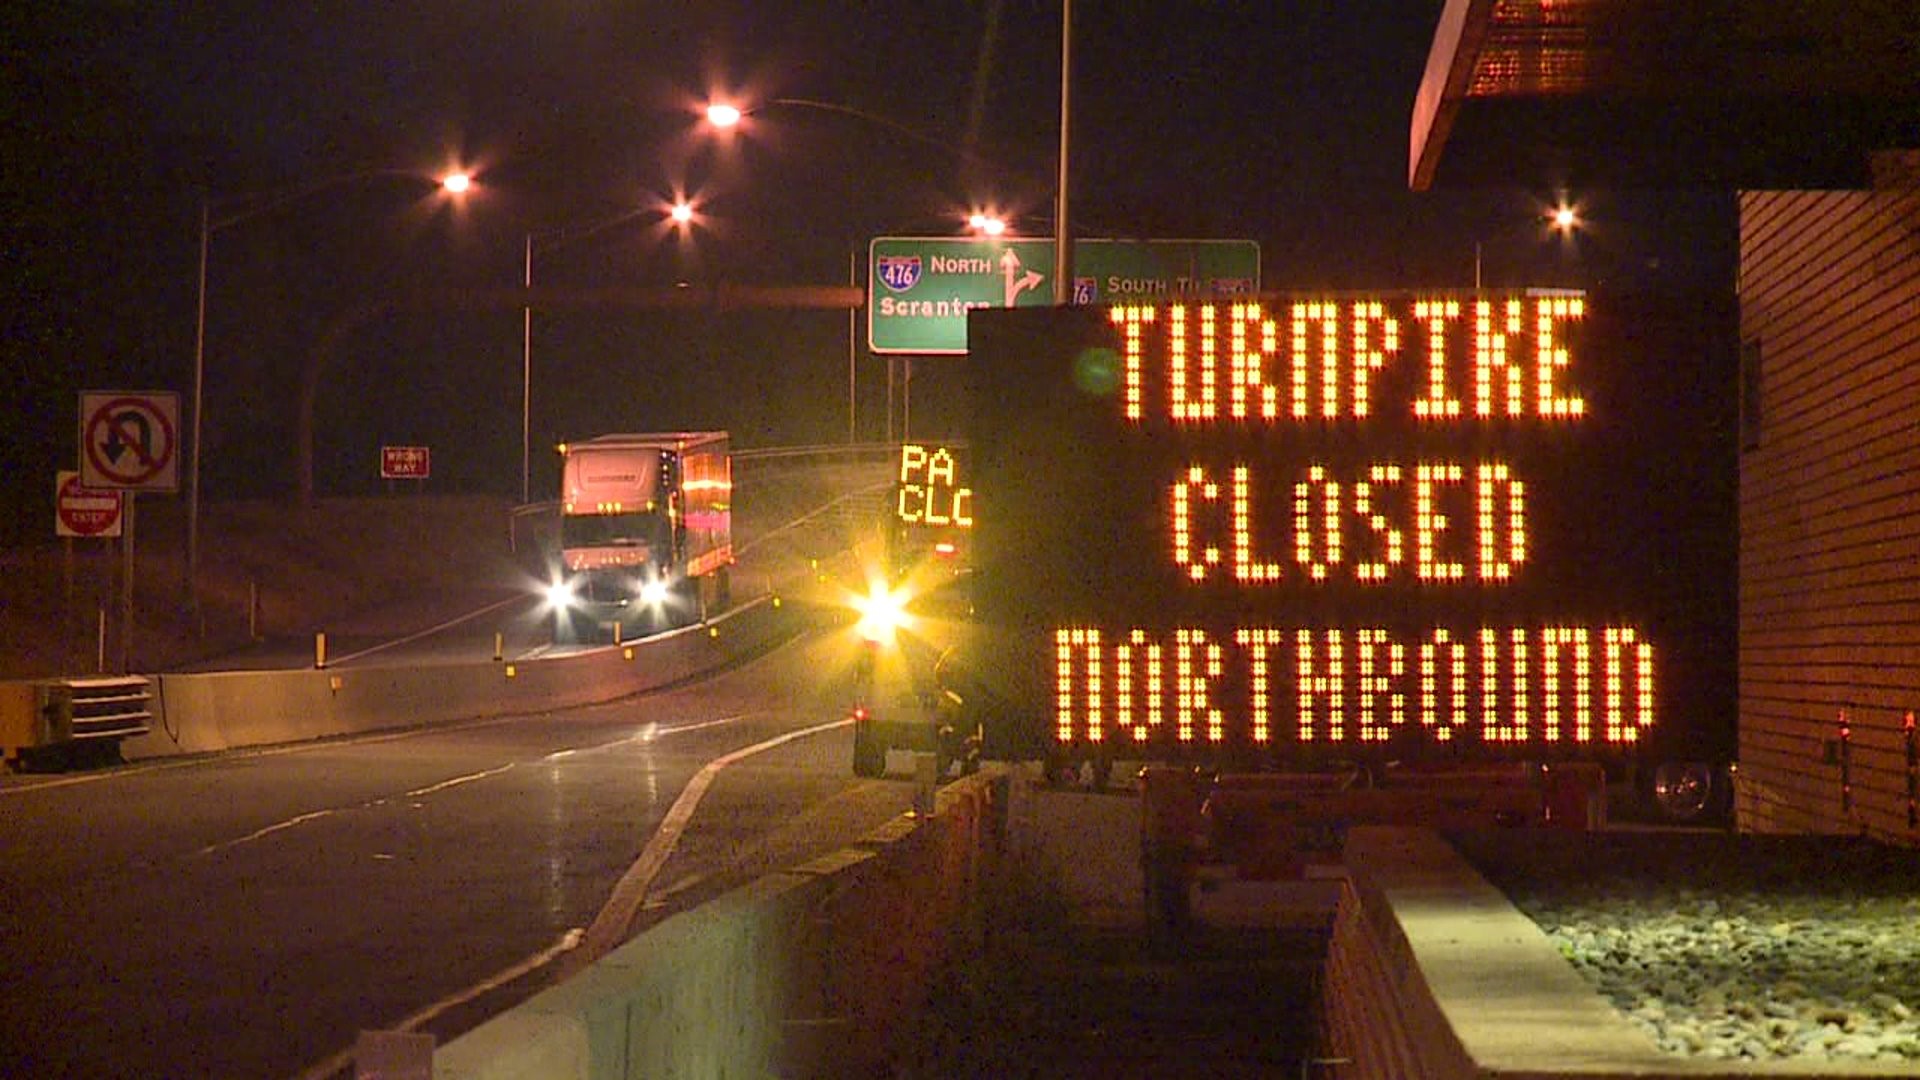 Turnpike Reopens After Overnight Paving Work